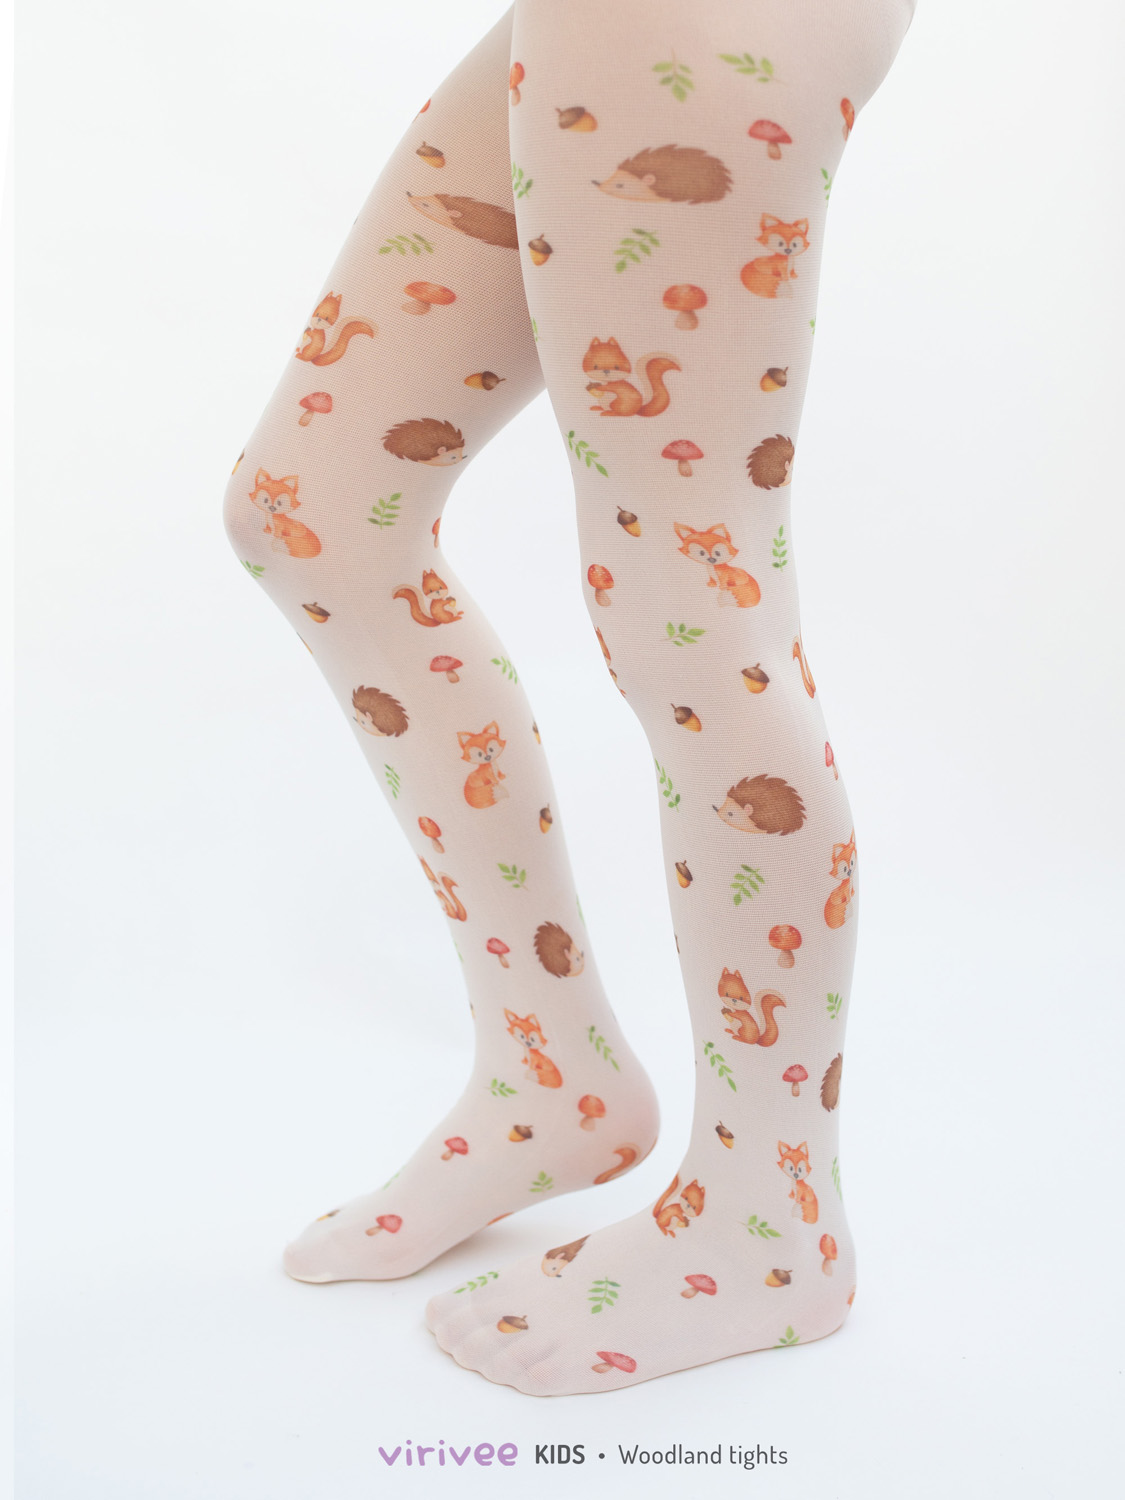 Woodlands pattern on girls’ tights